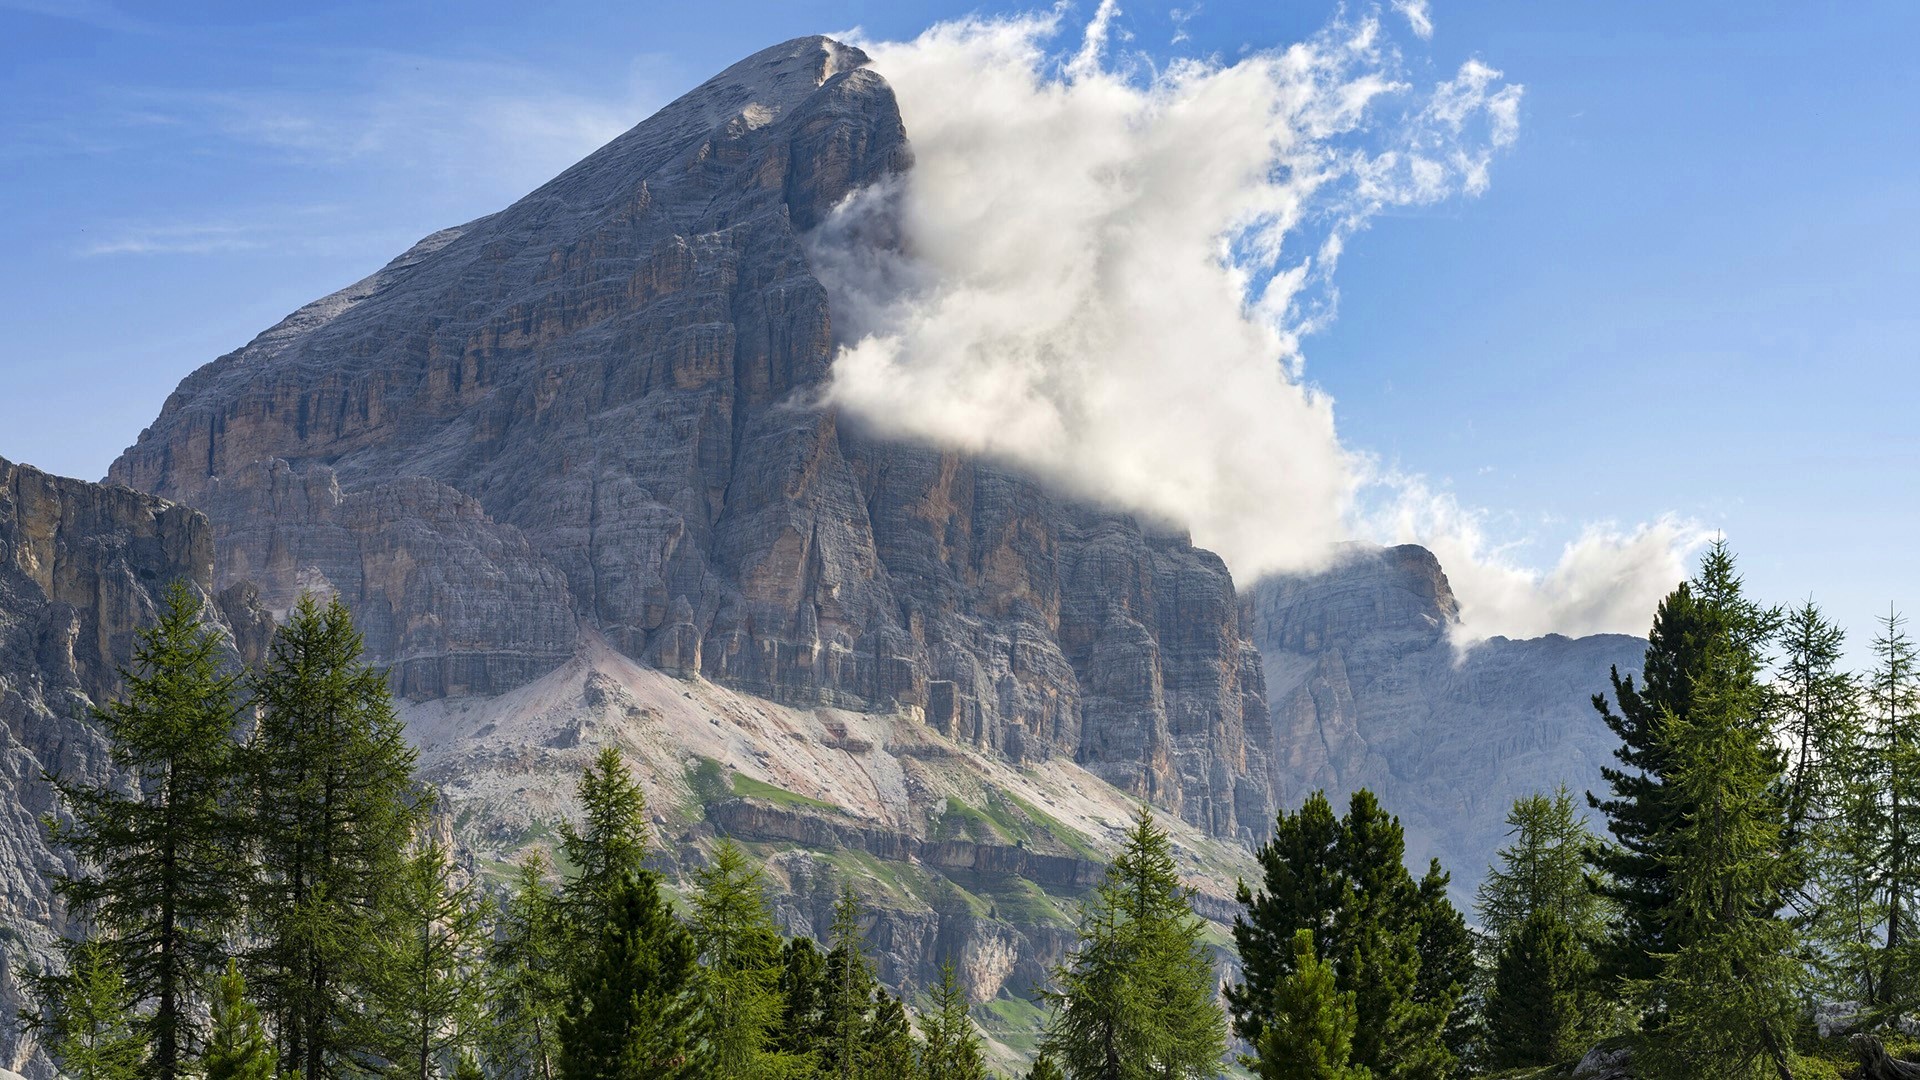 General 1920x1080 nature landscape mountains trees rocks clouds sky Dolomites Veneto Italy